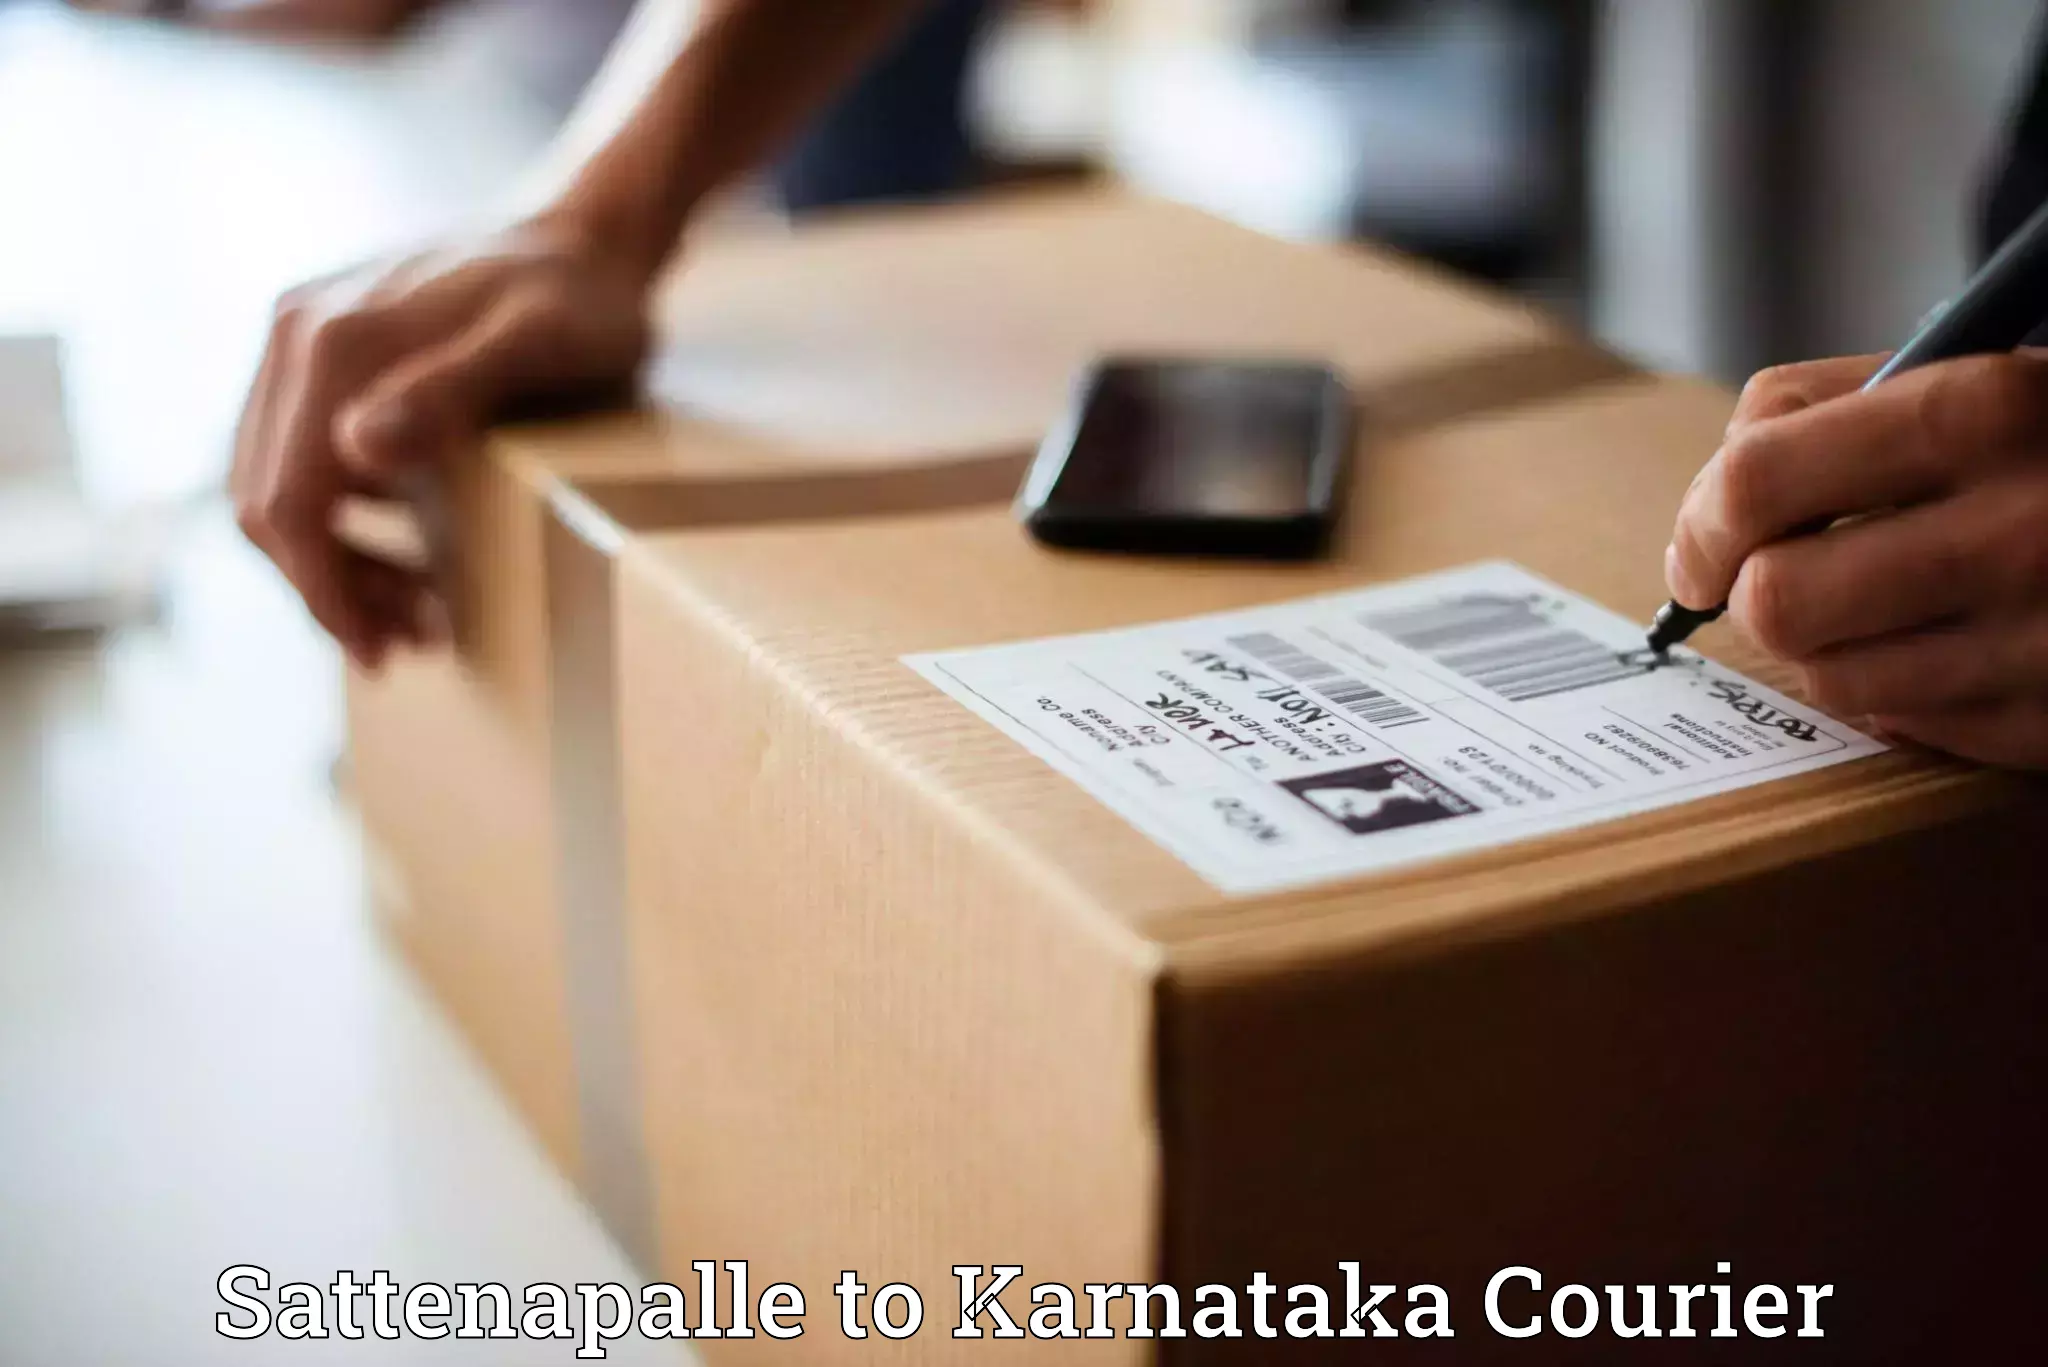 Multi-national courier services Sattenapalle to Thirthahalli